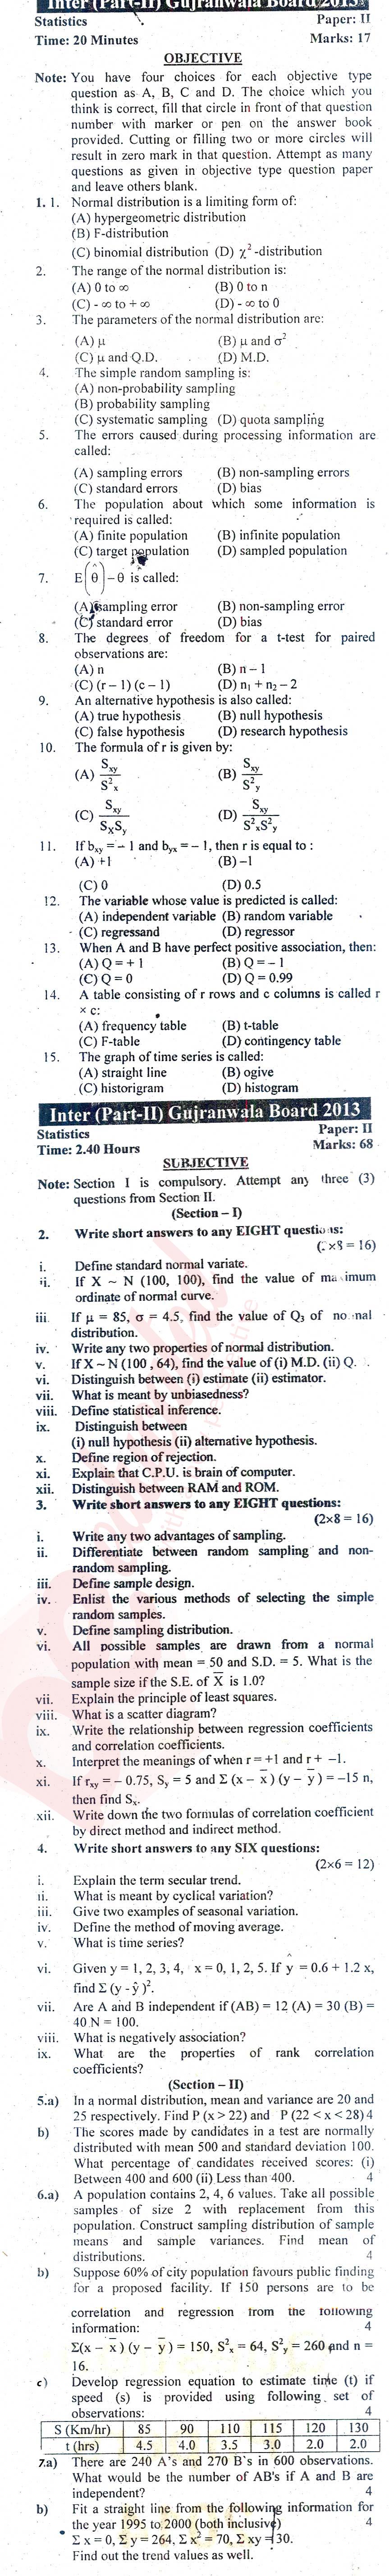 Statistics 12th class Past Paper Group 1 BISE Gujranwala 2013